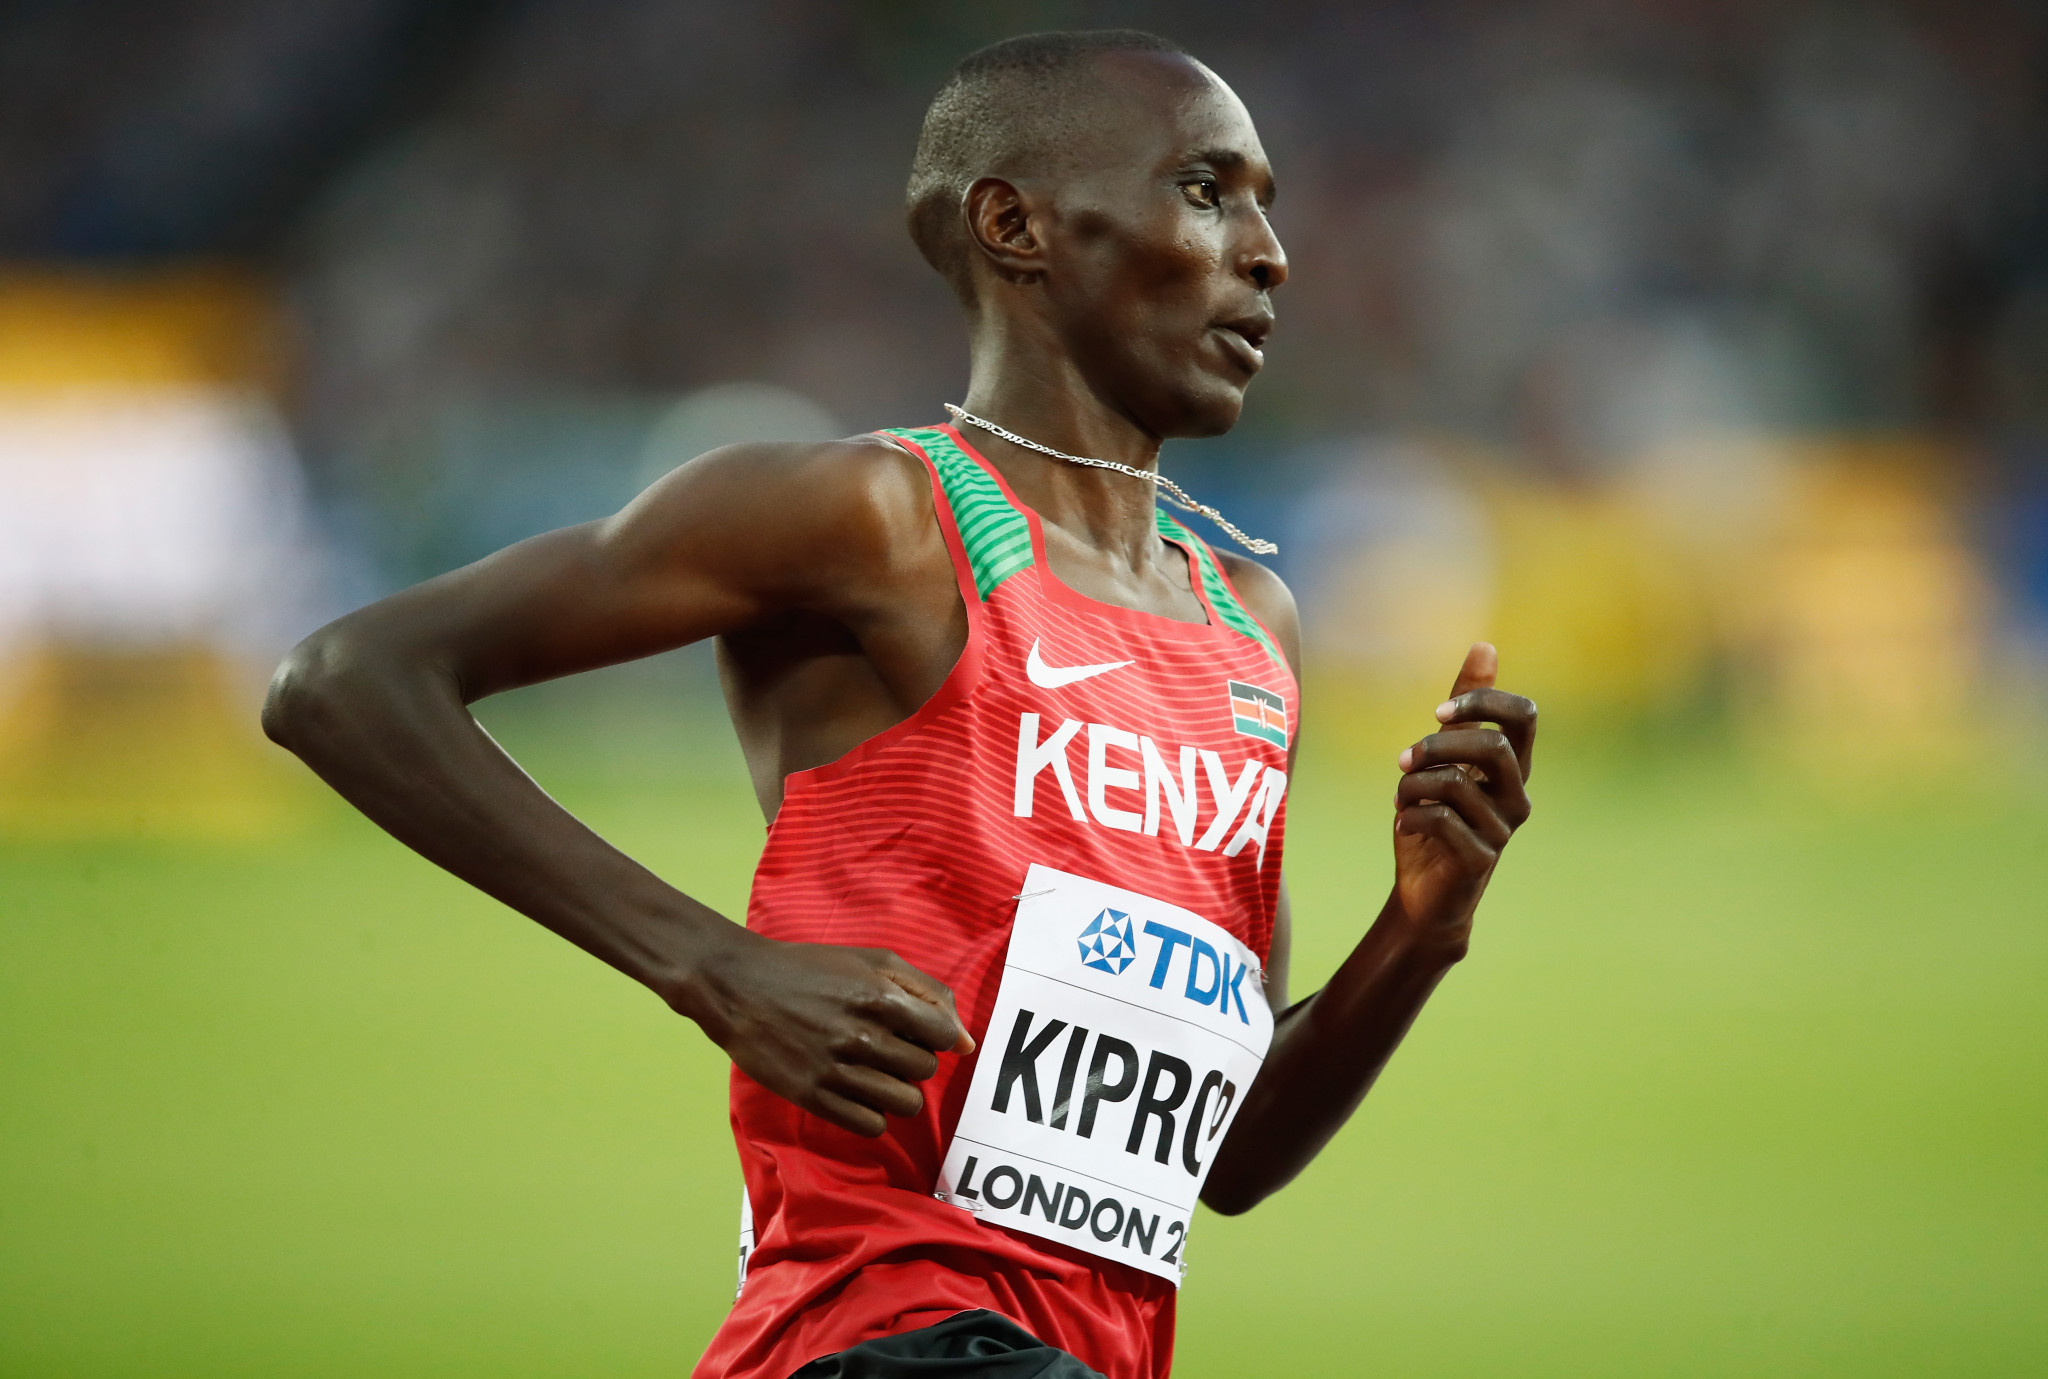 Kiprop alleges extortion by doping control officers after positive test